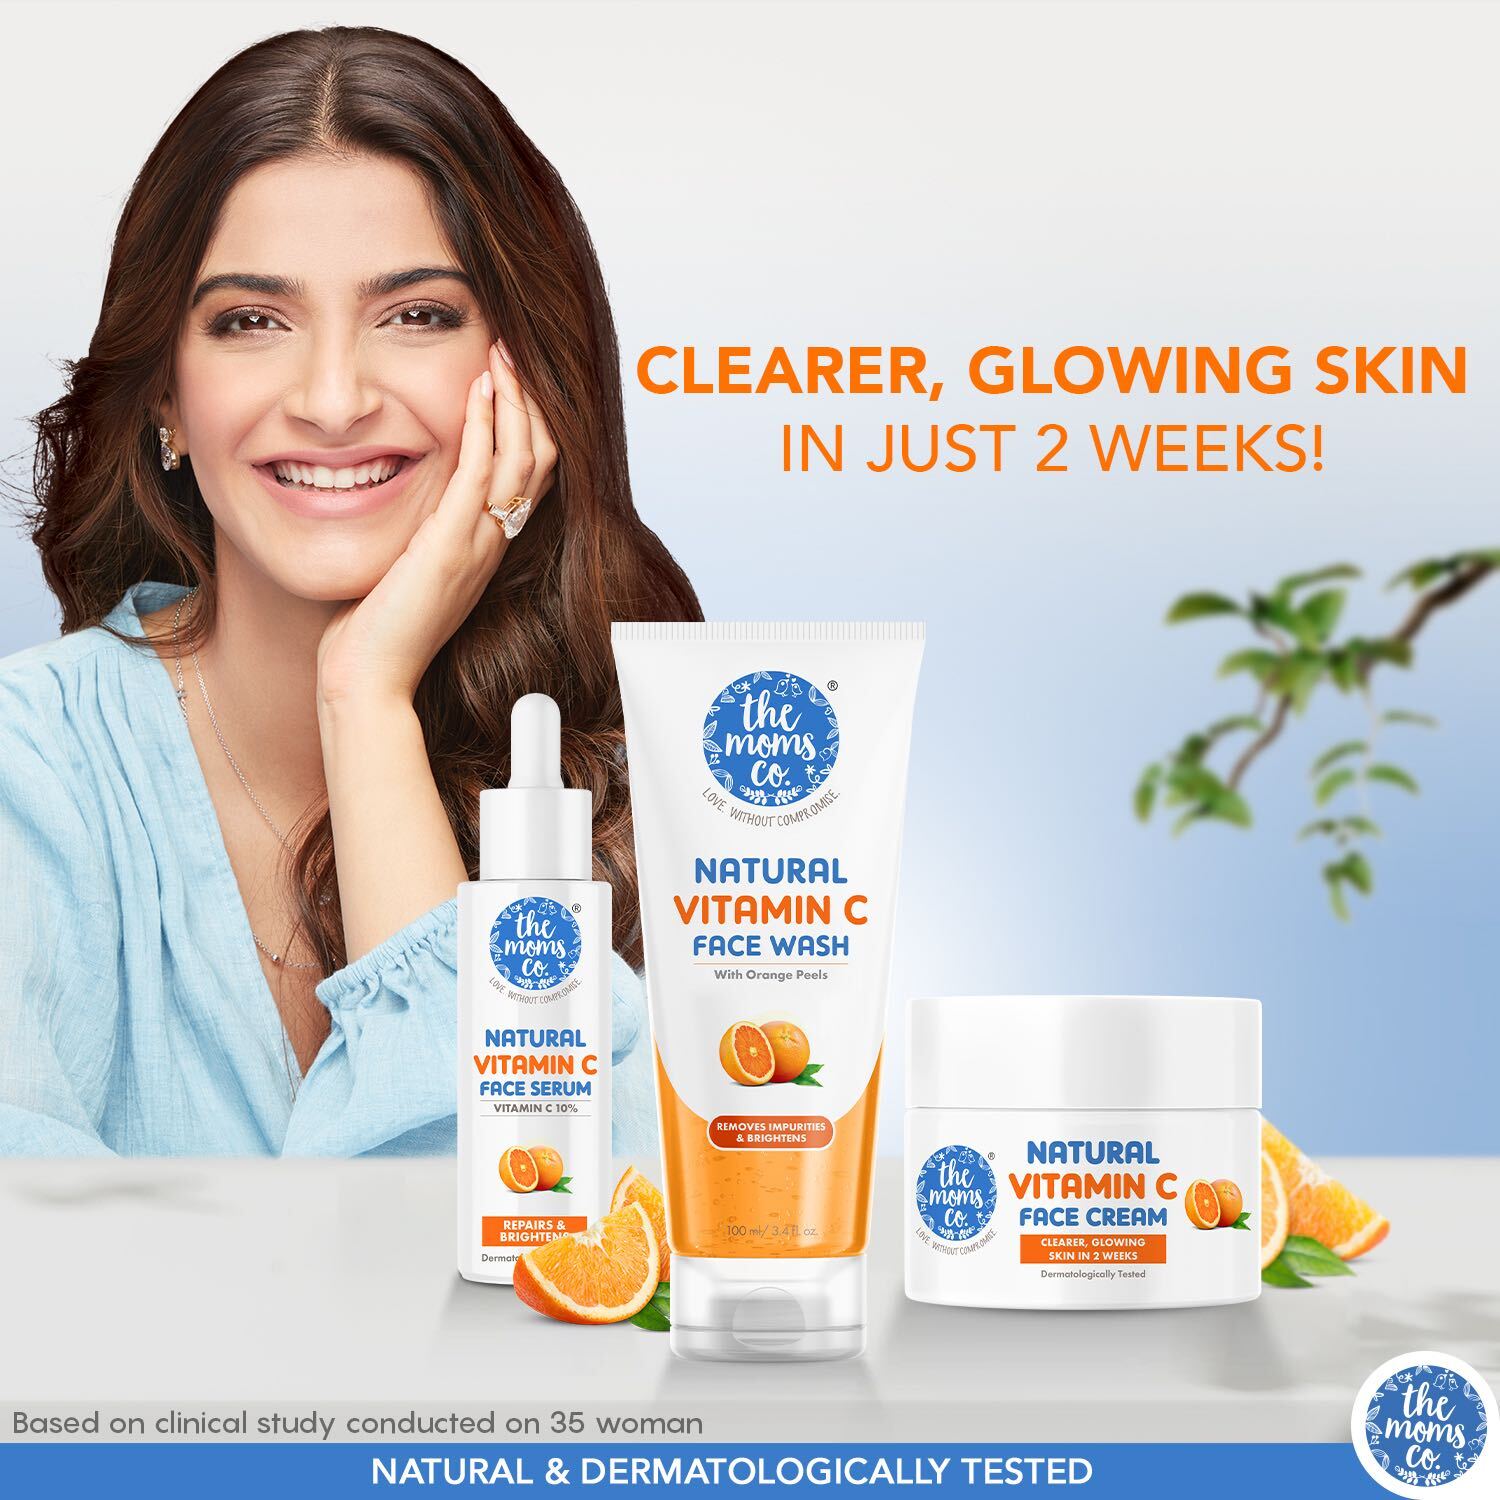 5 Reasons Why You Shouldn’t Compromise On Glowing Skin And Add The Moms Co. Vitamin C Range To Your Skincare Stash